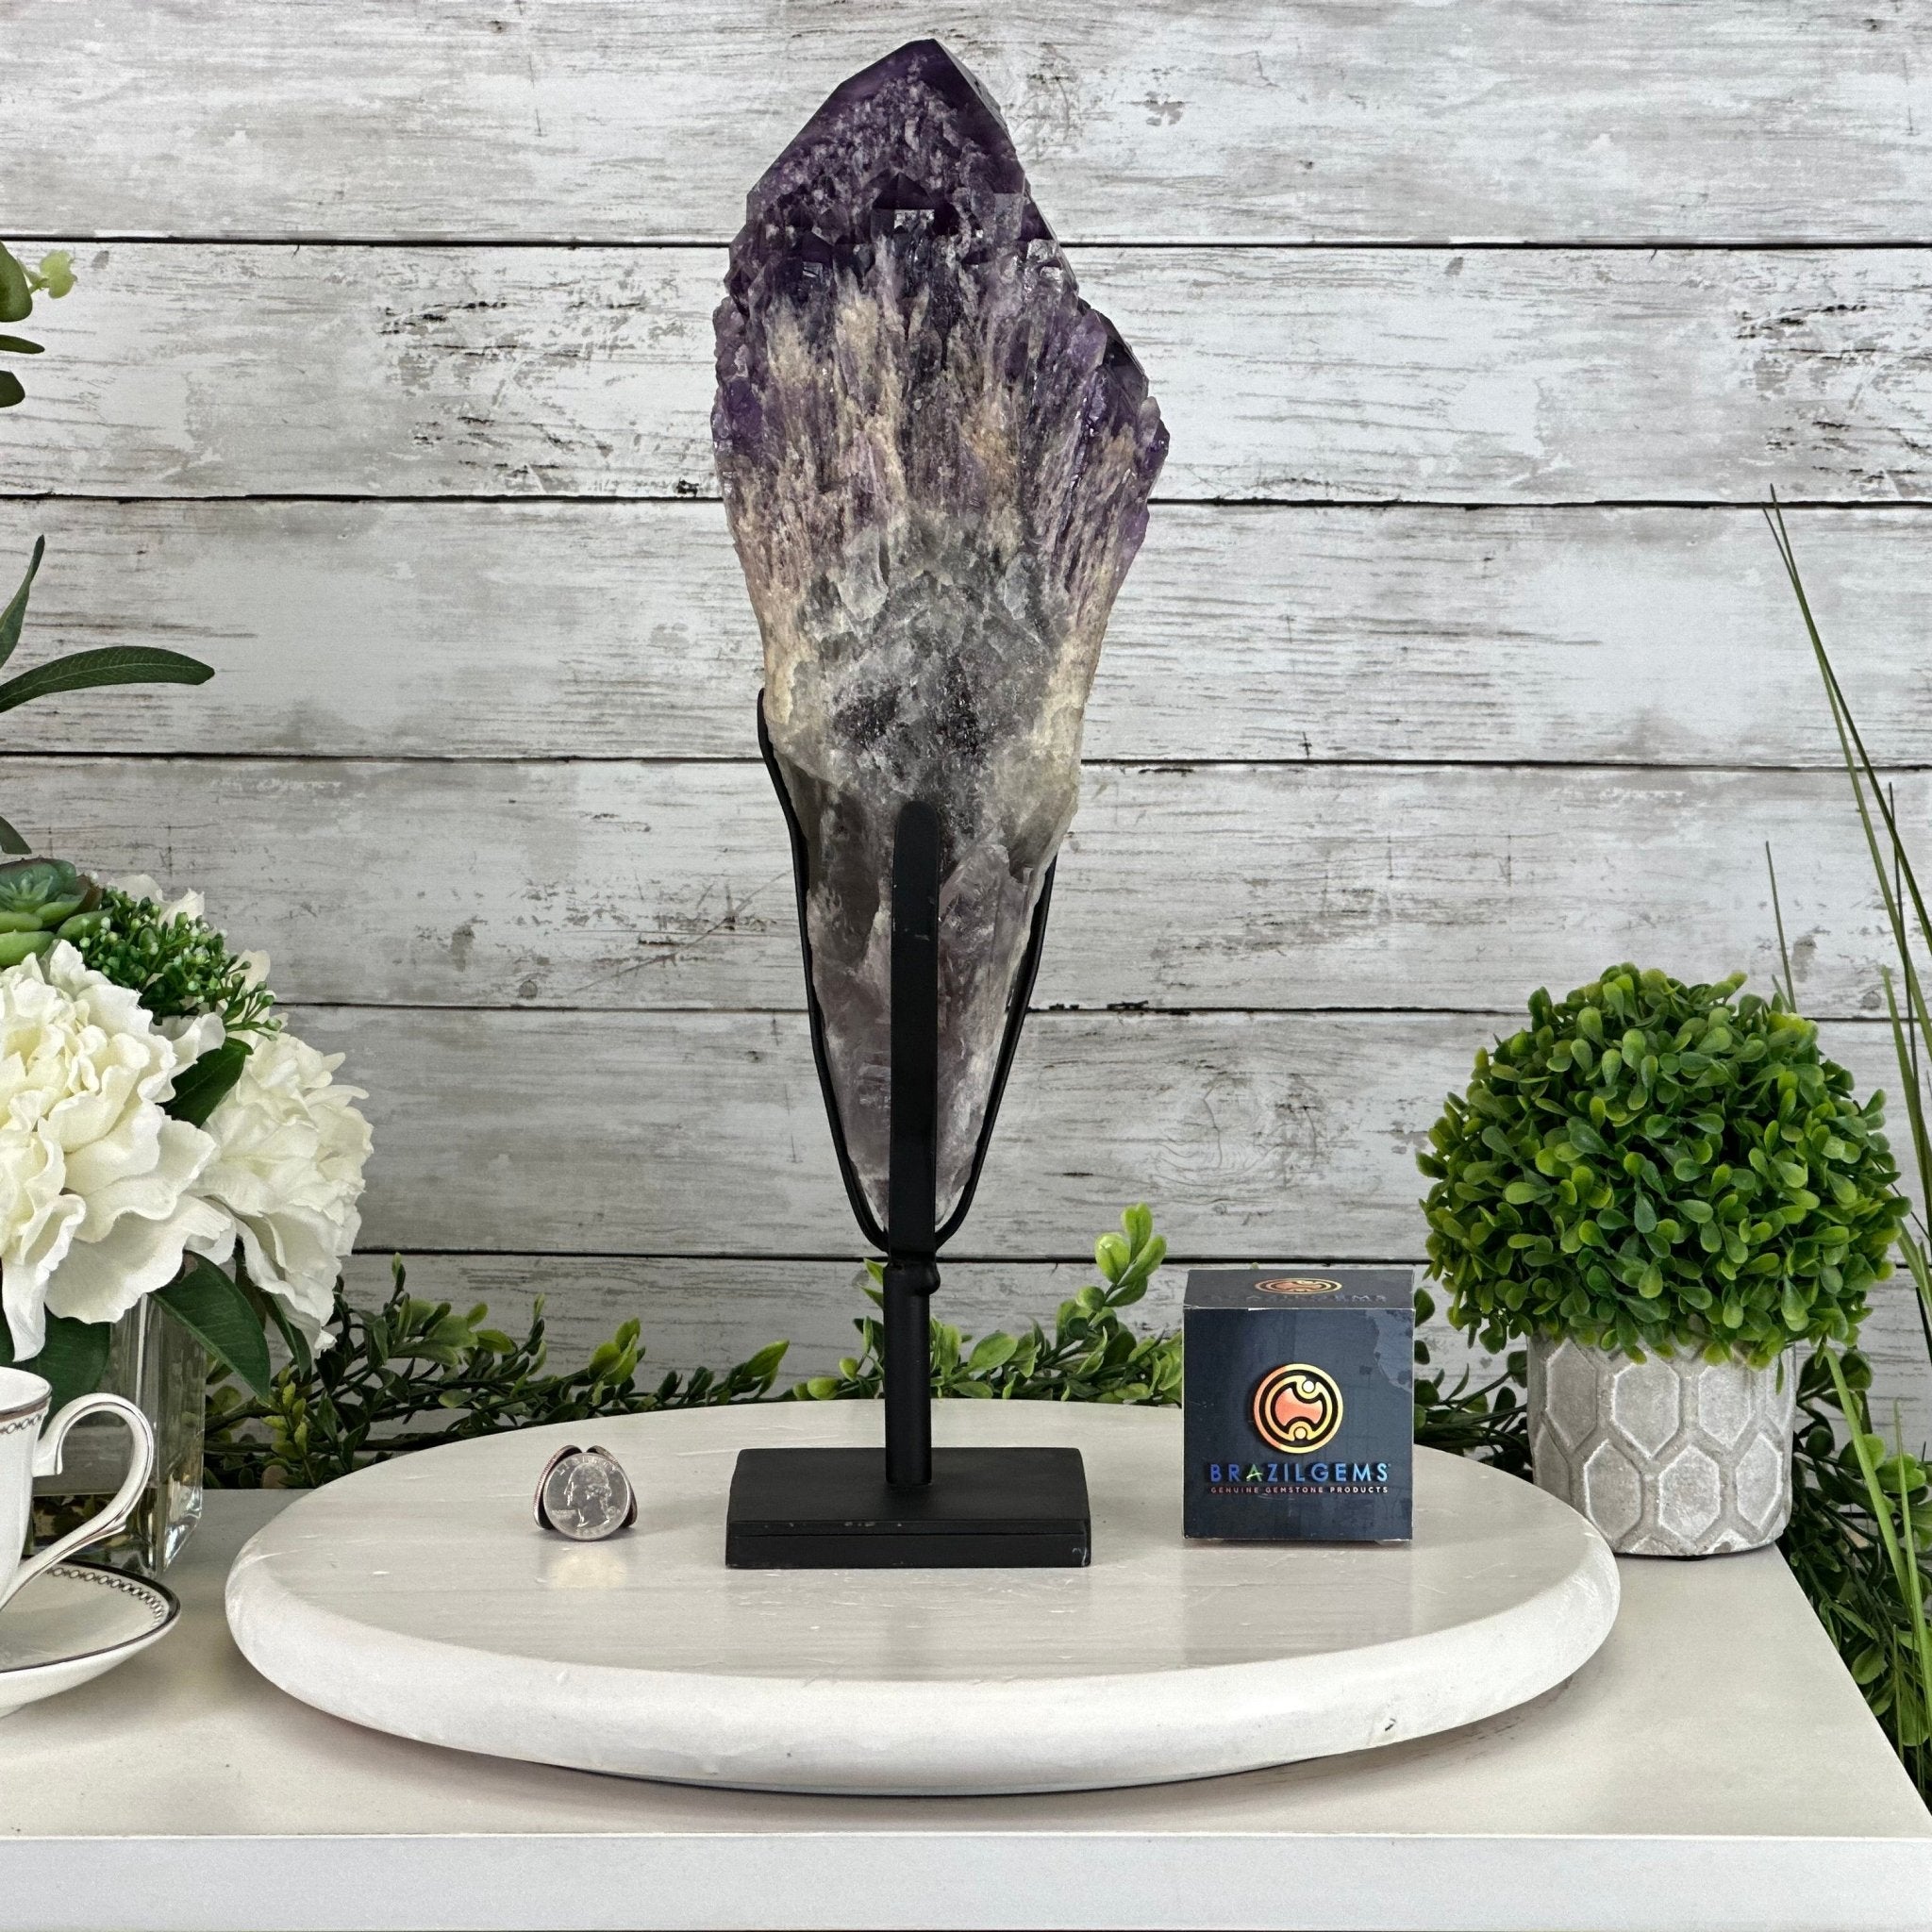 Large Chevron Amethyst Point on a Metal Stand, 9.2 lbs & 16.1" Tall #3121AM-002 - Brazil GemsBrazil GemsLarge Chevron Amethyst Point on a Metal Stand, 9.2 lbs & 16.1" Tall #3121AM-002Crystal Points3121AM-002